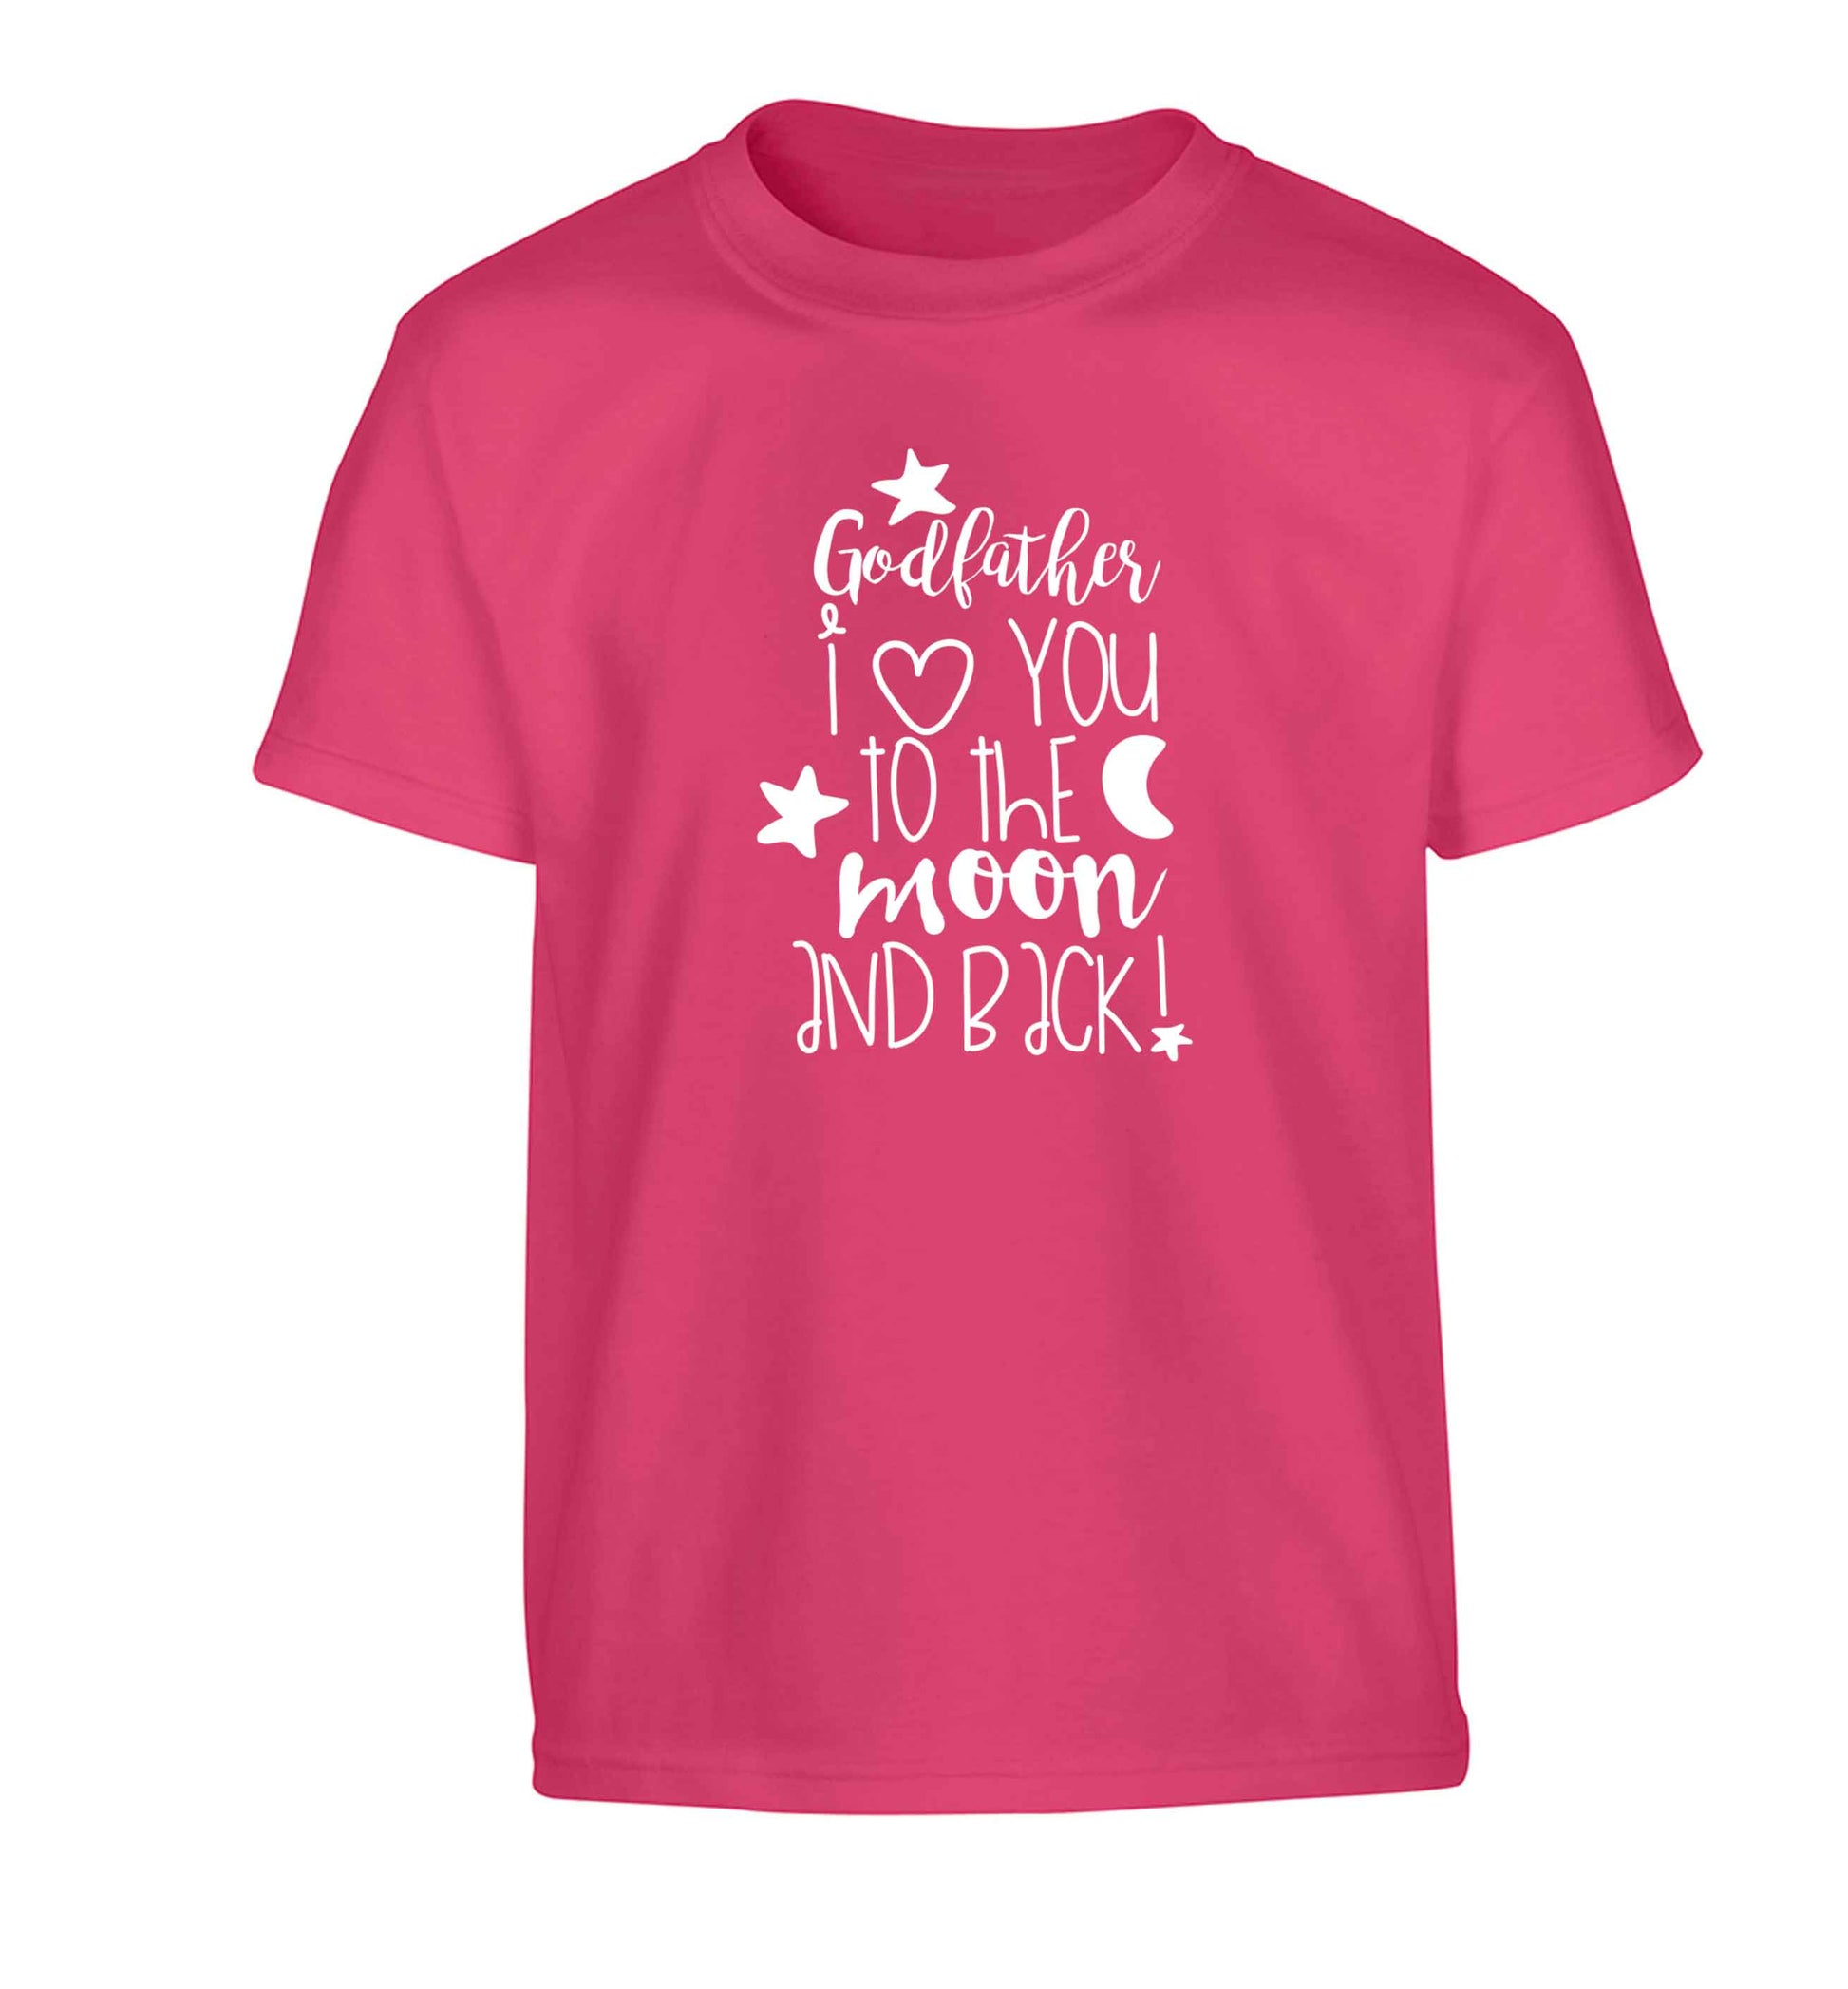 Godfather I love you to the moon and back Children's pink Tshirt 12-13 Years